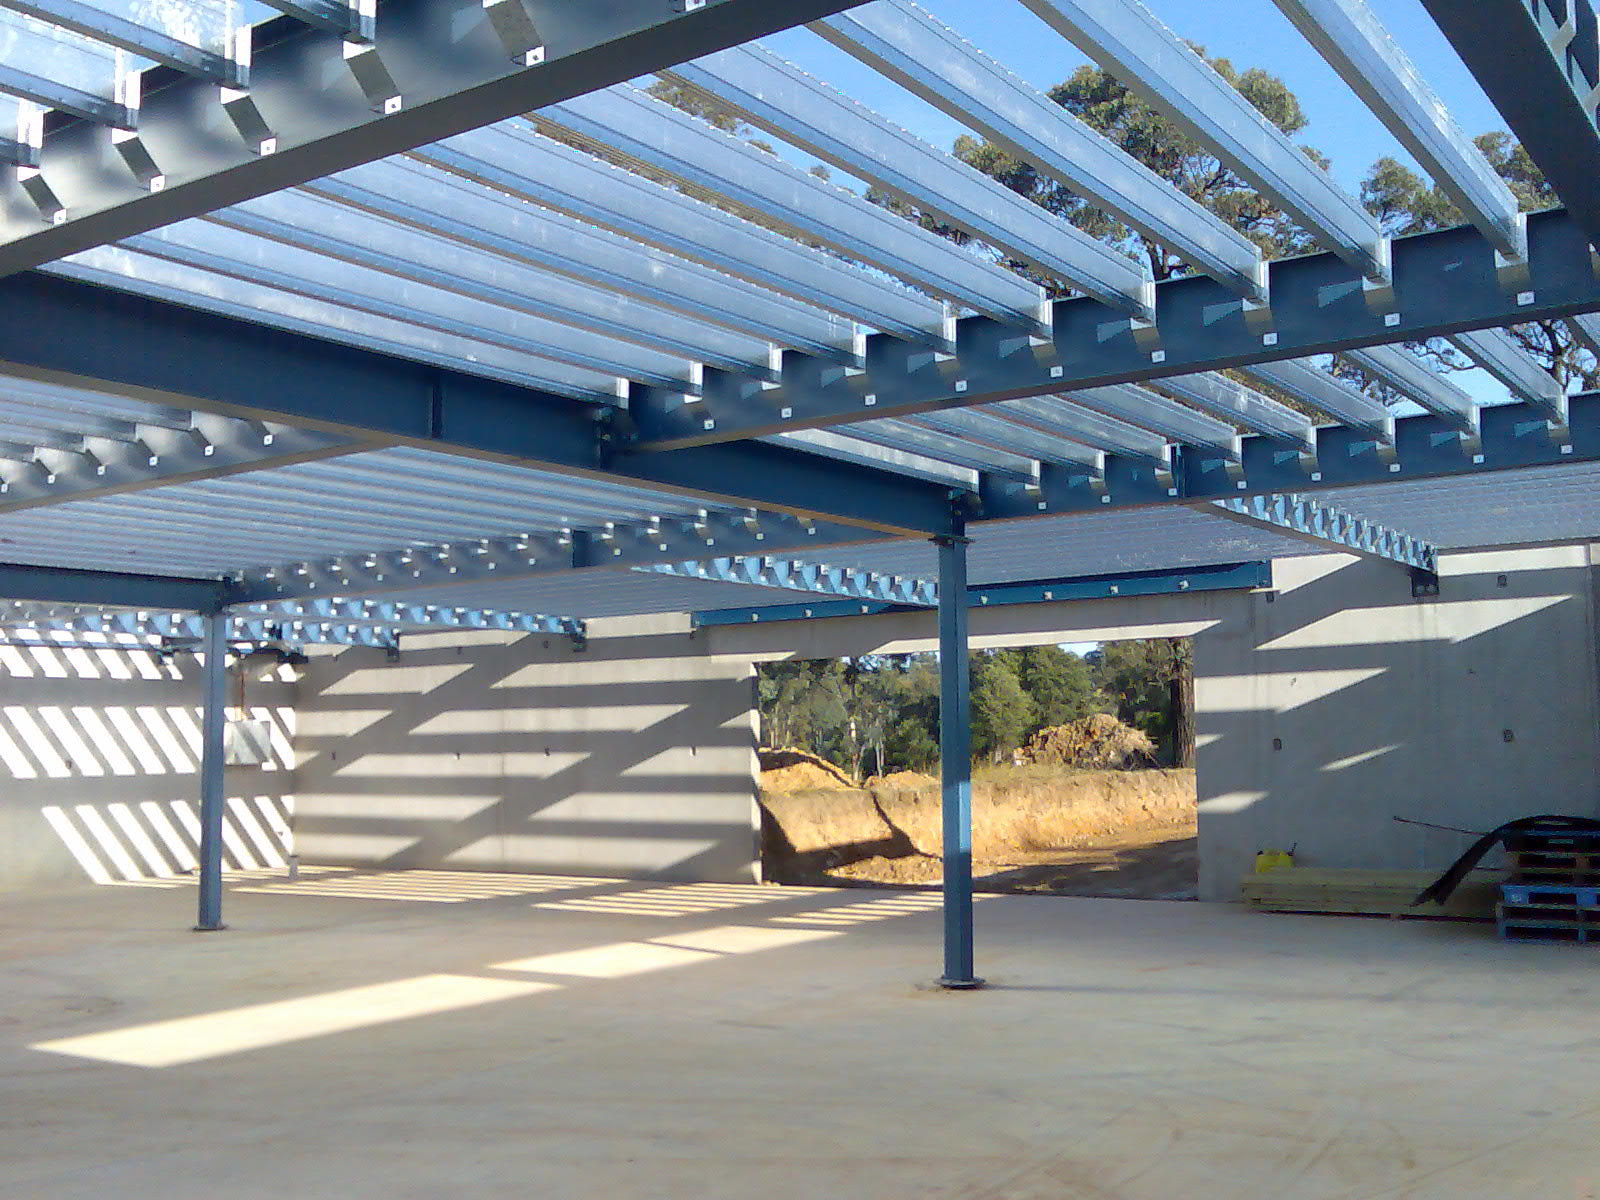 Large clear spans with Boxspan floor joists